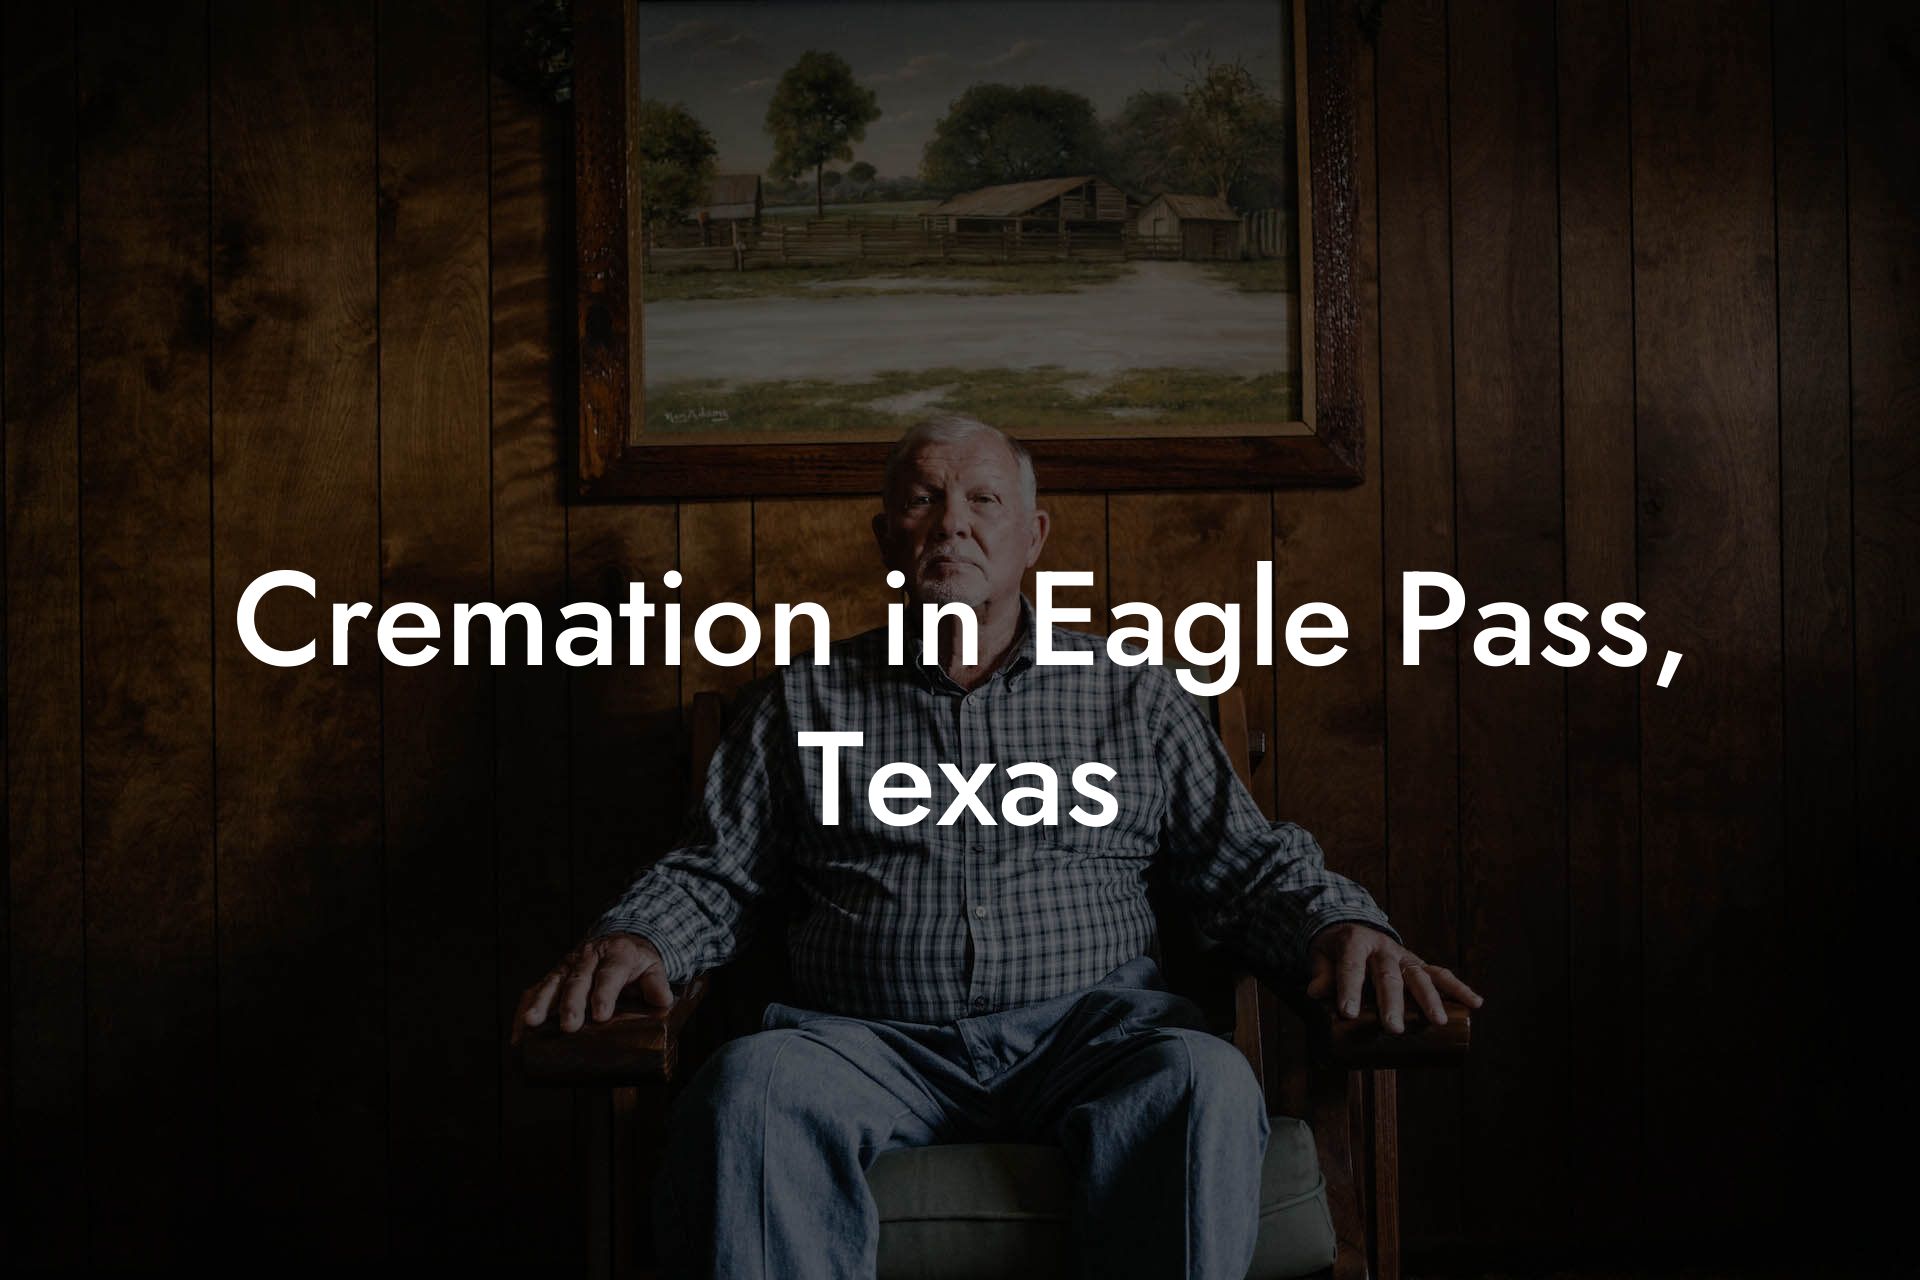 Cremation in Eagle Pass, Texas